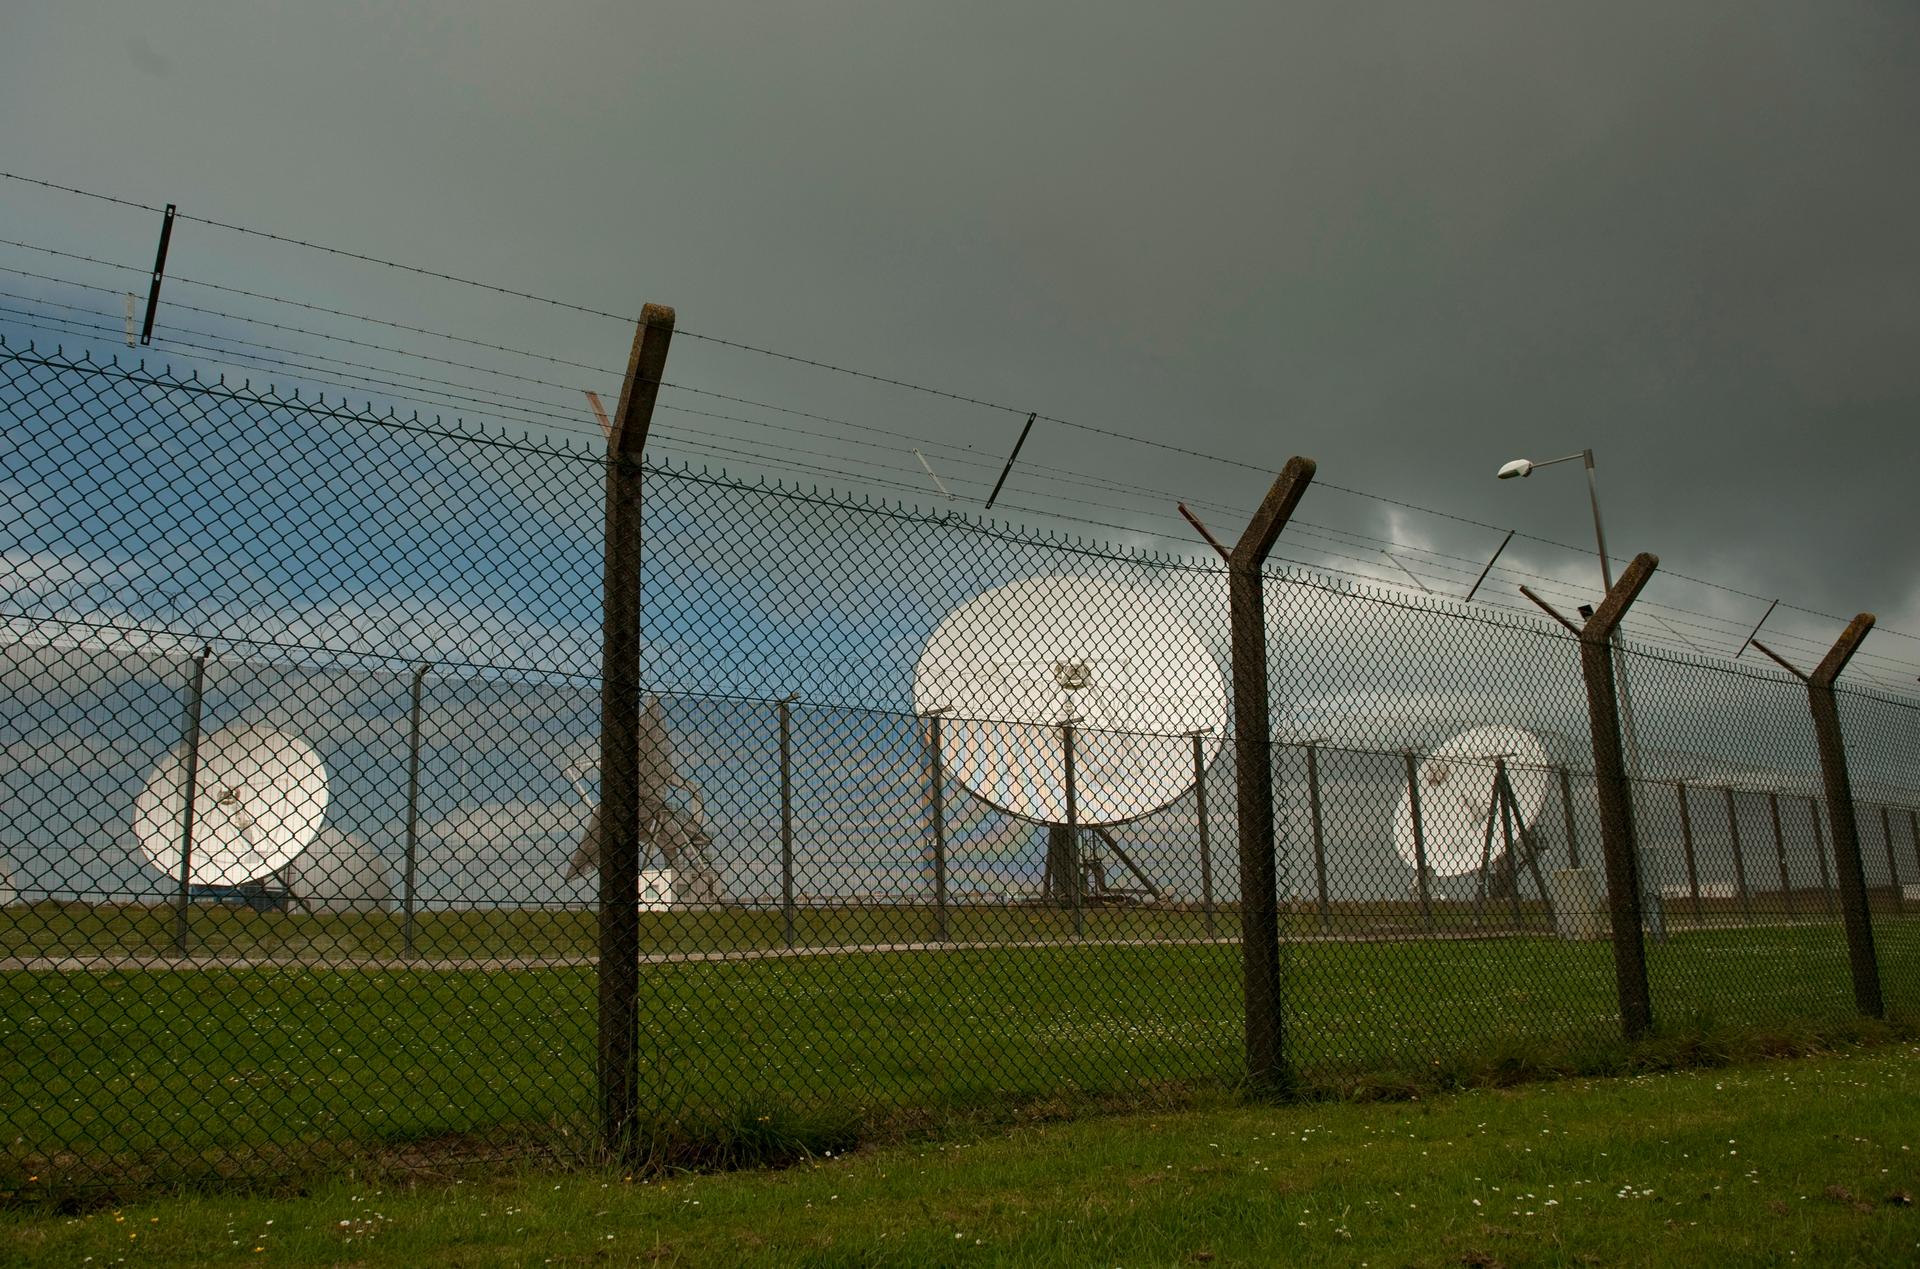 Satellite dishes at Britain's spy agency GCHQ, close to where trans-Atlantic fibre-optic cables come ashore in Cornwall. GCHQ has tapped fibre-optic cables that carry international phone and internet traffic and is sharing vast quantities of personal info